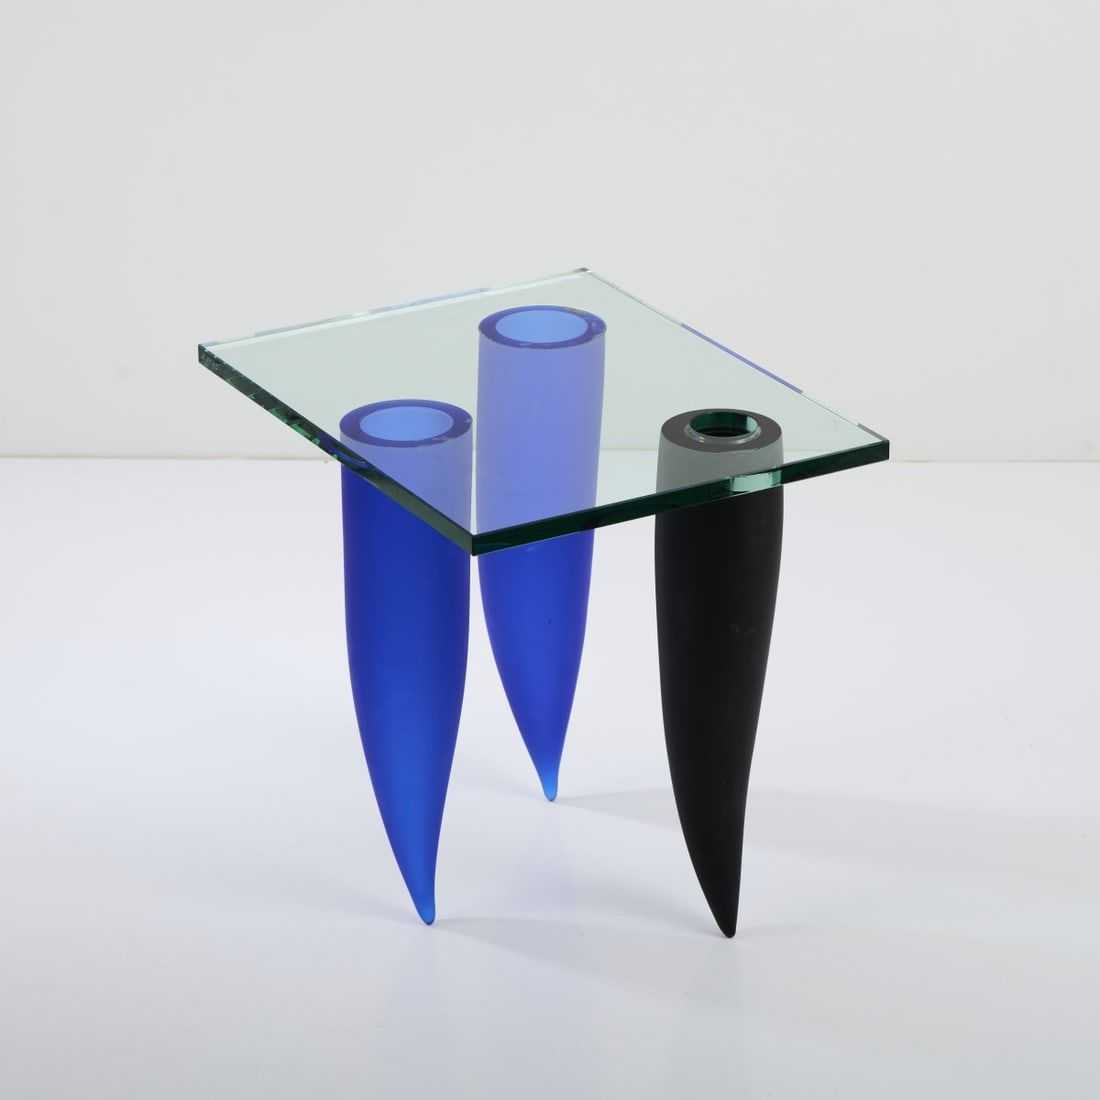 Another angle on the 1988 Philippe Starck coffee table called Trois Étrangetés sous un Mur (Three Strangers under a Wall), which sold for €5,200 ($5,540) plus the buyer’s premium in October 2023. Image courtesy of Quittenbaum Kunstauktionen GmbH and LiveAuctioneers.